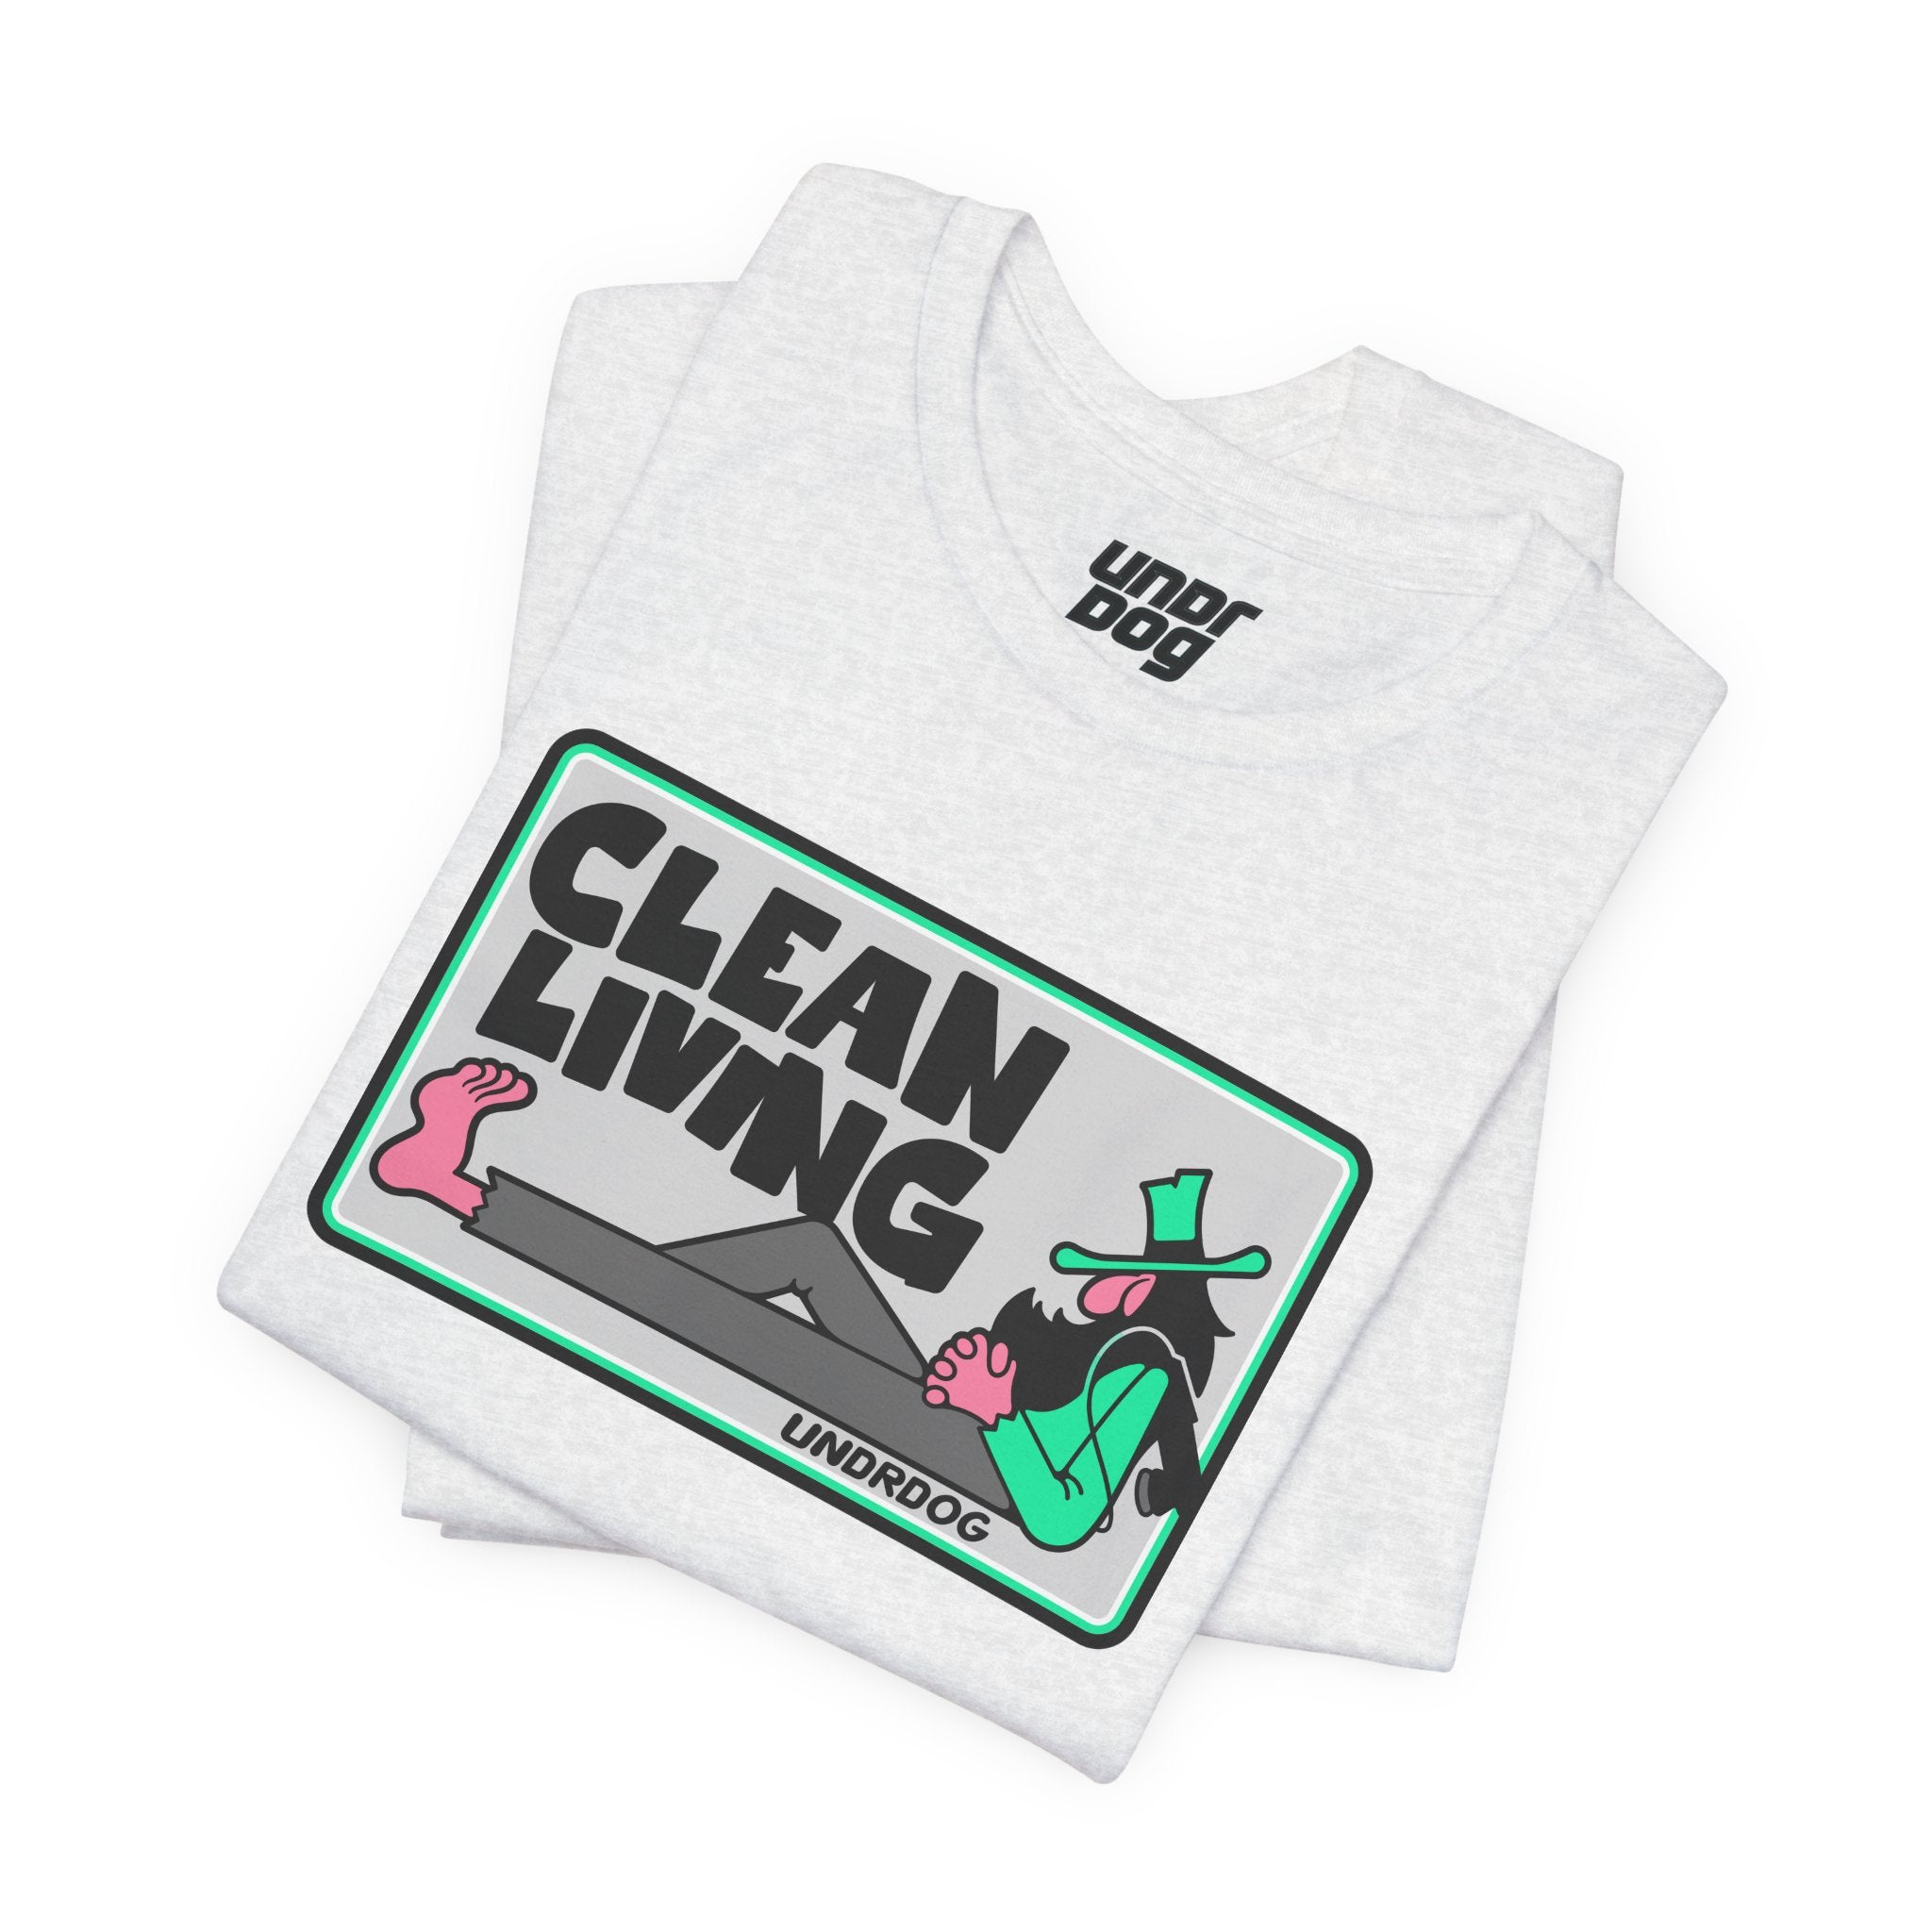 4579916552070999943_2048.jpg - Clean Living v2 by Undrdog Tee - Undrdog Surface Products